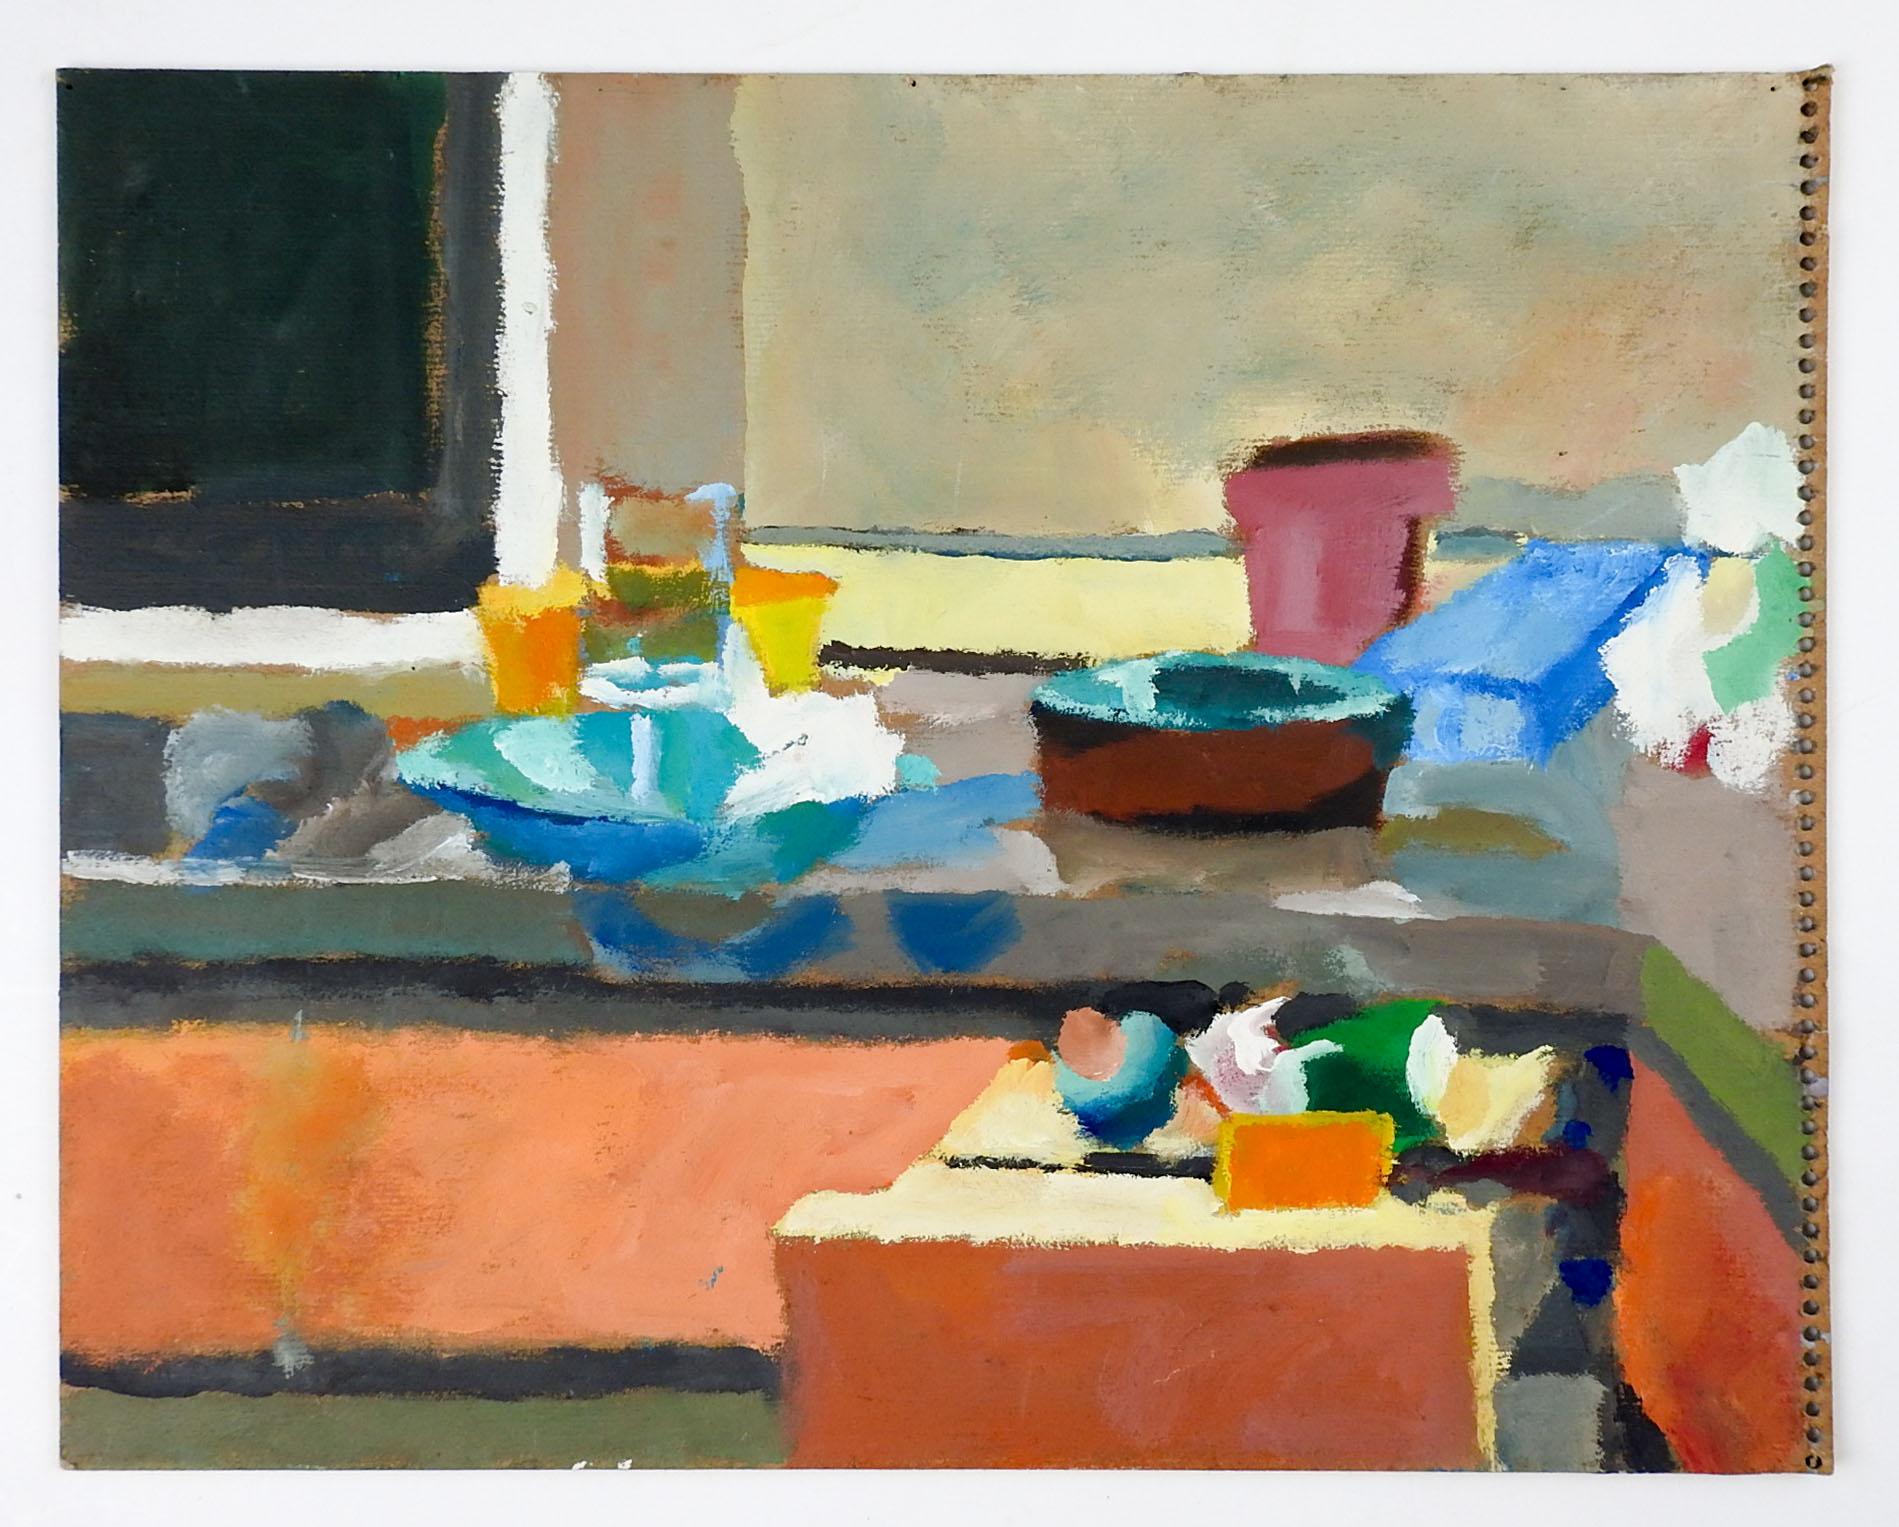 Oil on artist board abstract view of kitchen counter by Marilyn Lanfear (1930-2020) Texas, circa late 20th century. Unsigned. Unframed, directly from the artists estate, edge wear.